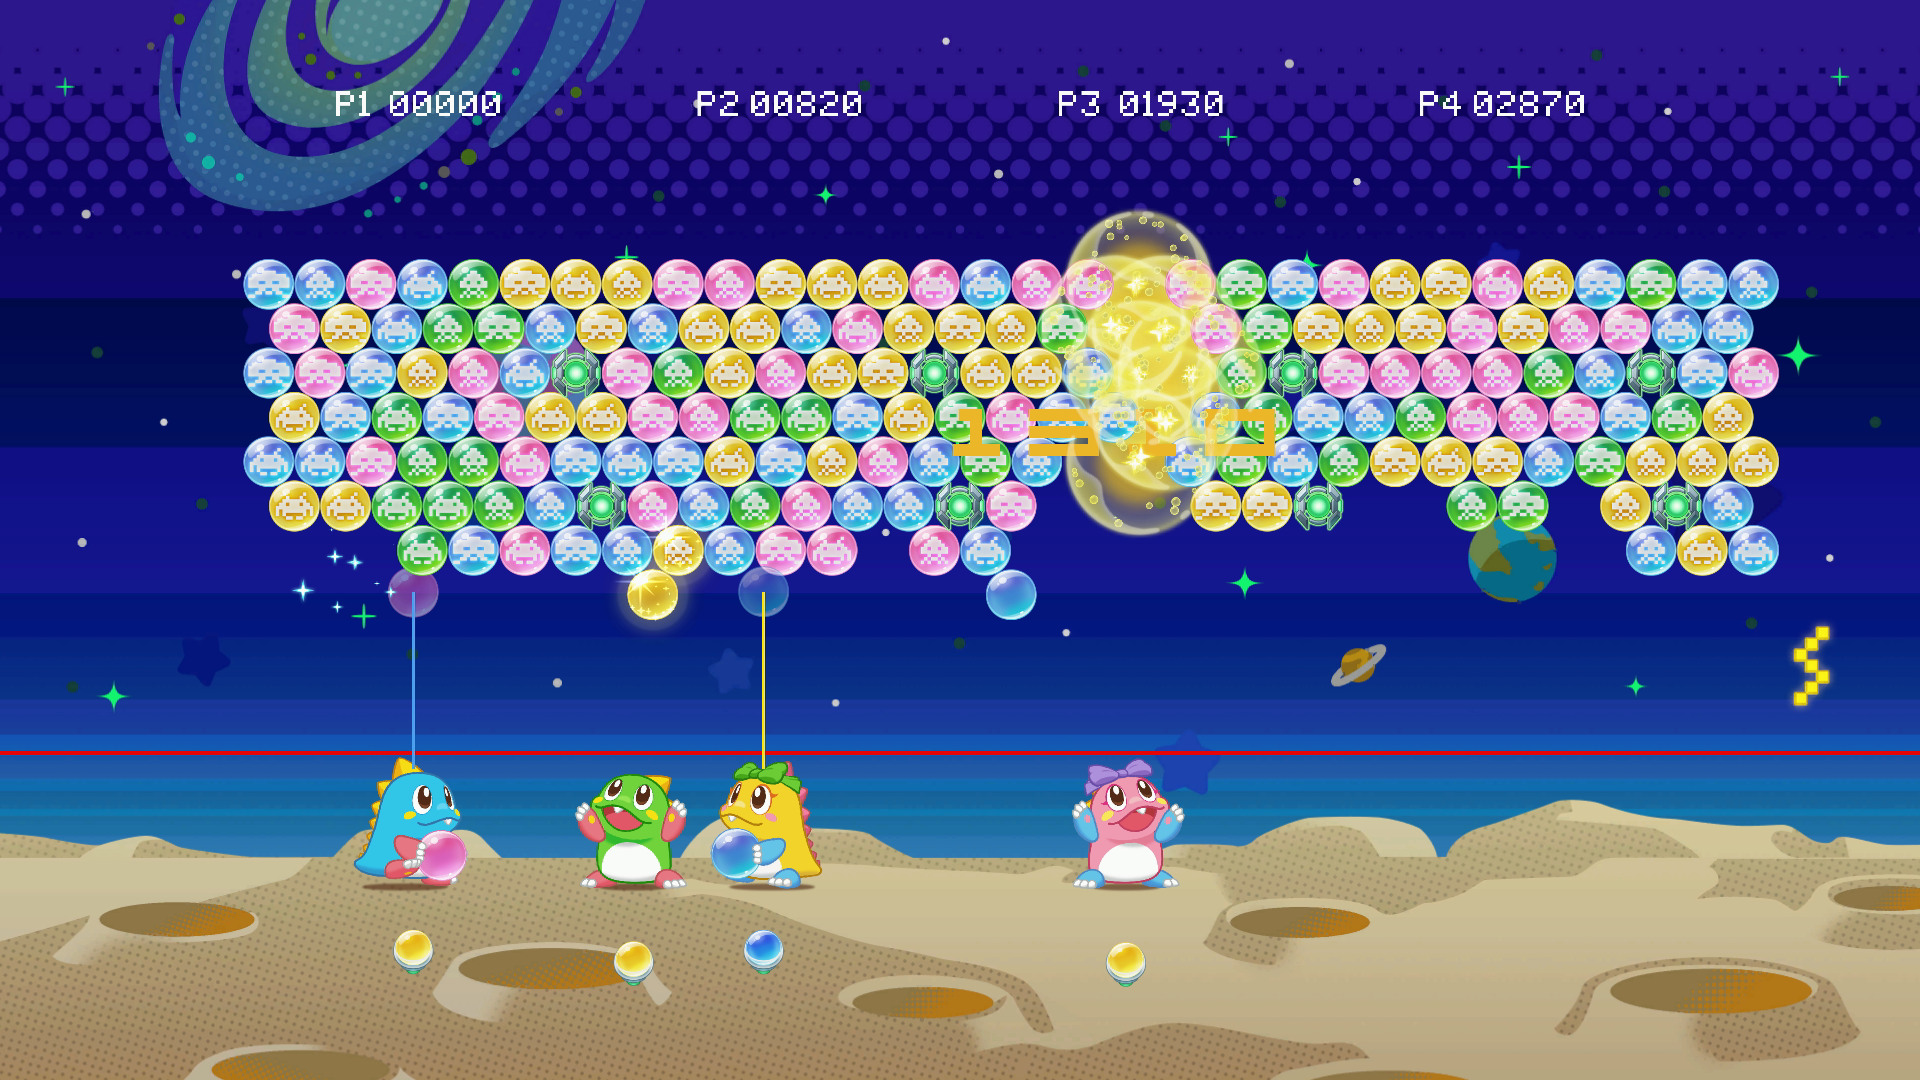 Puzzle Bobble VS Space Invaders